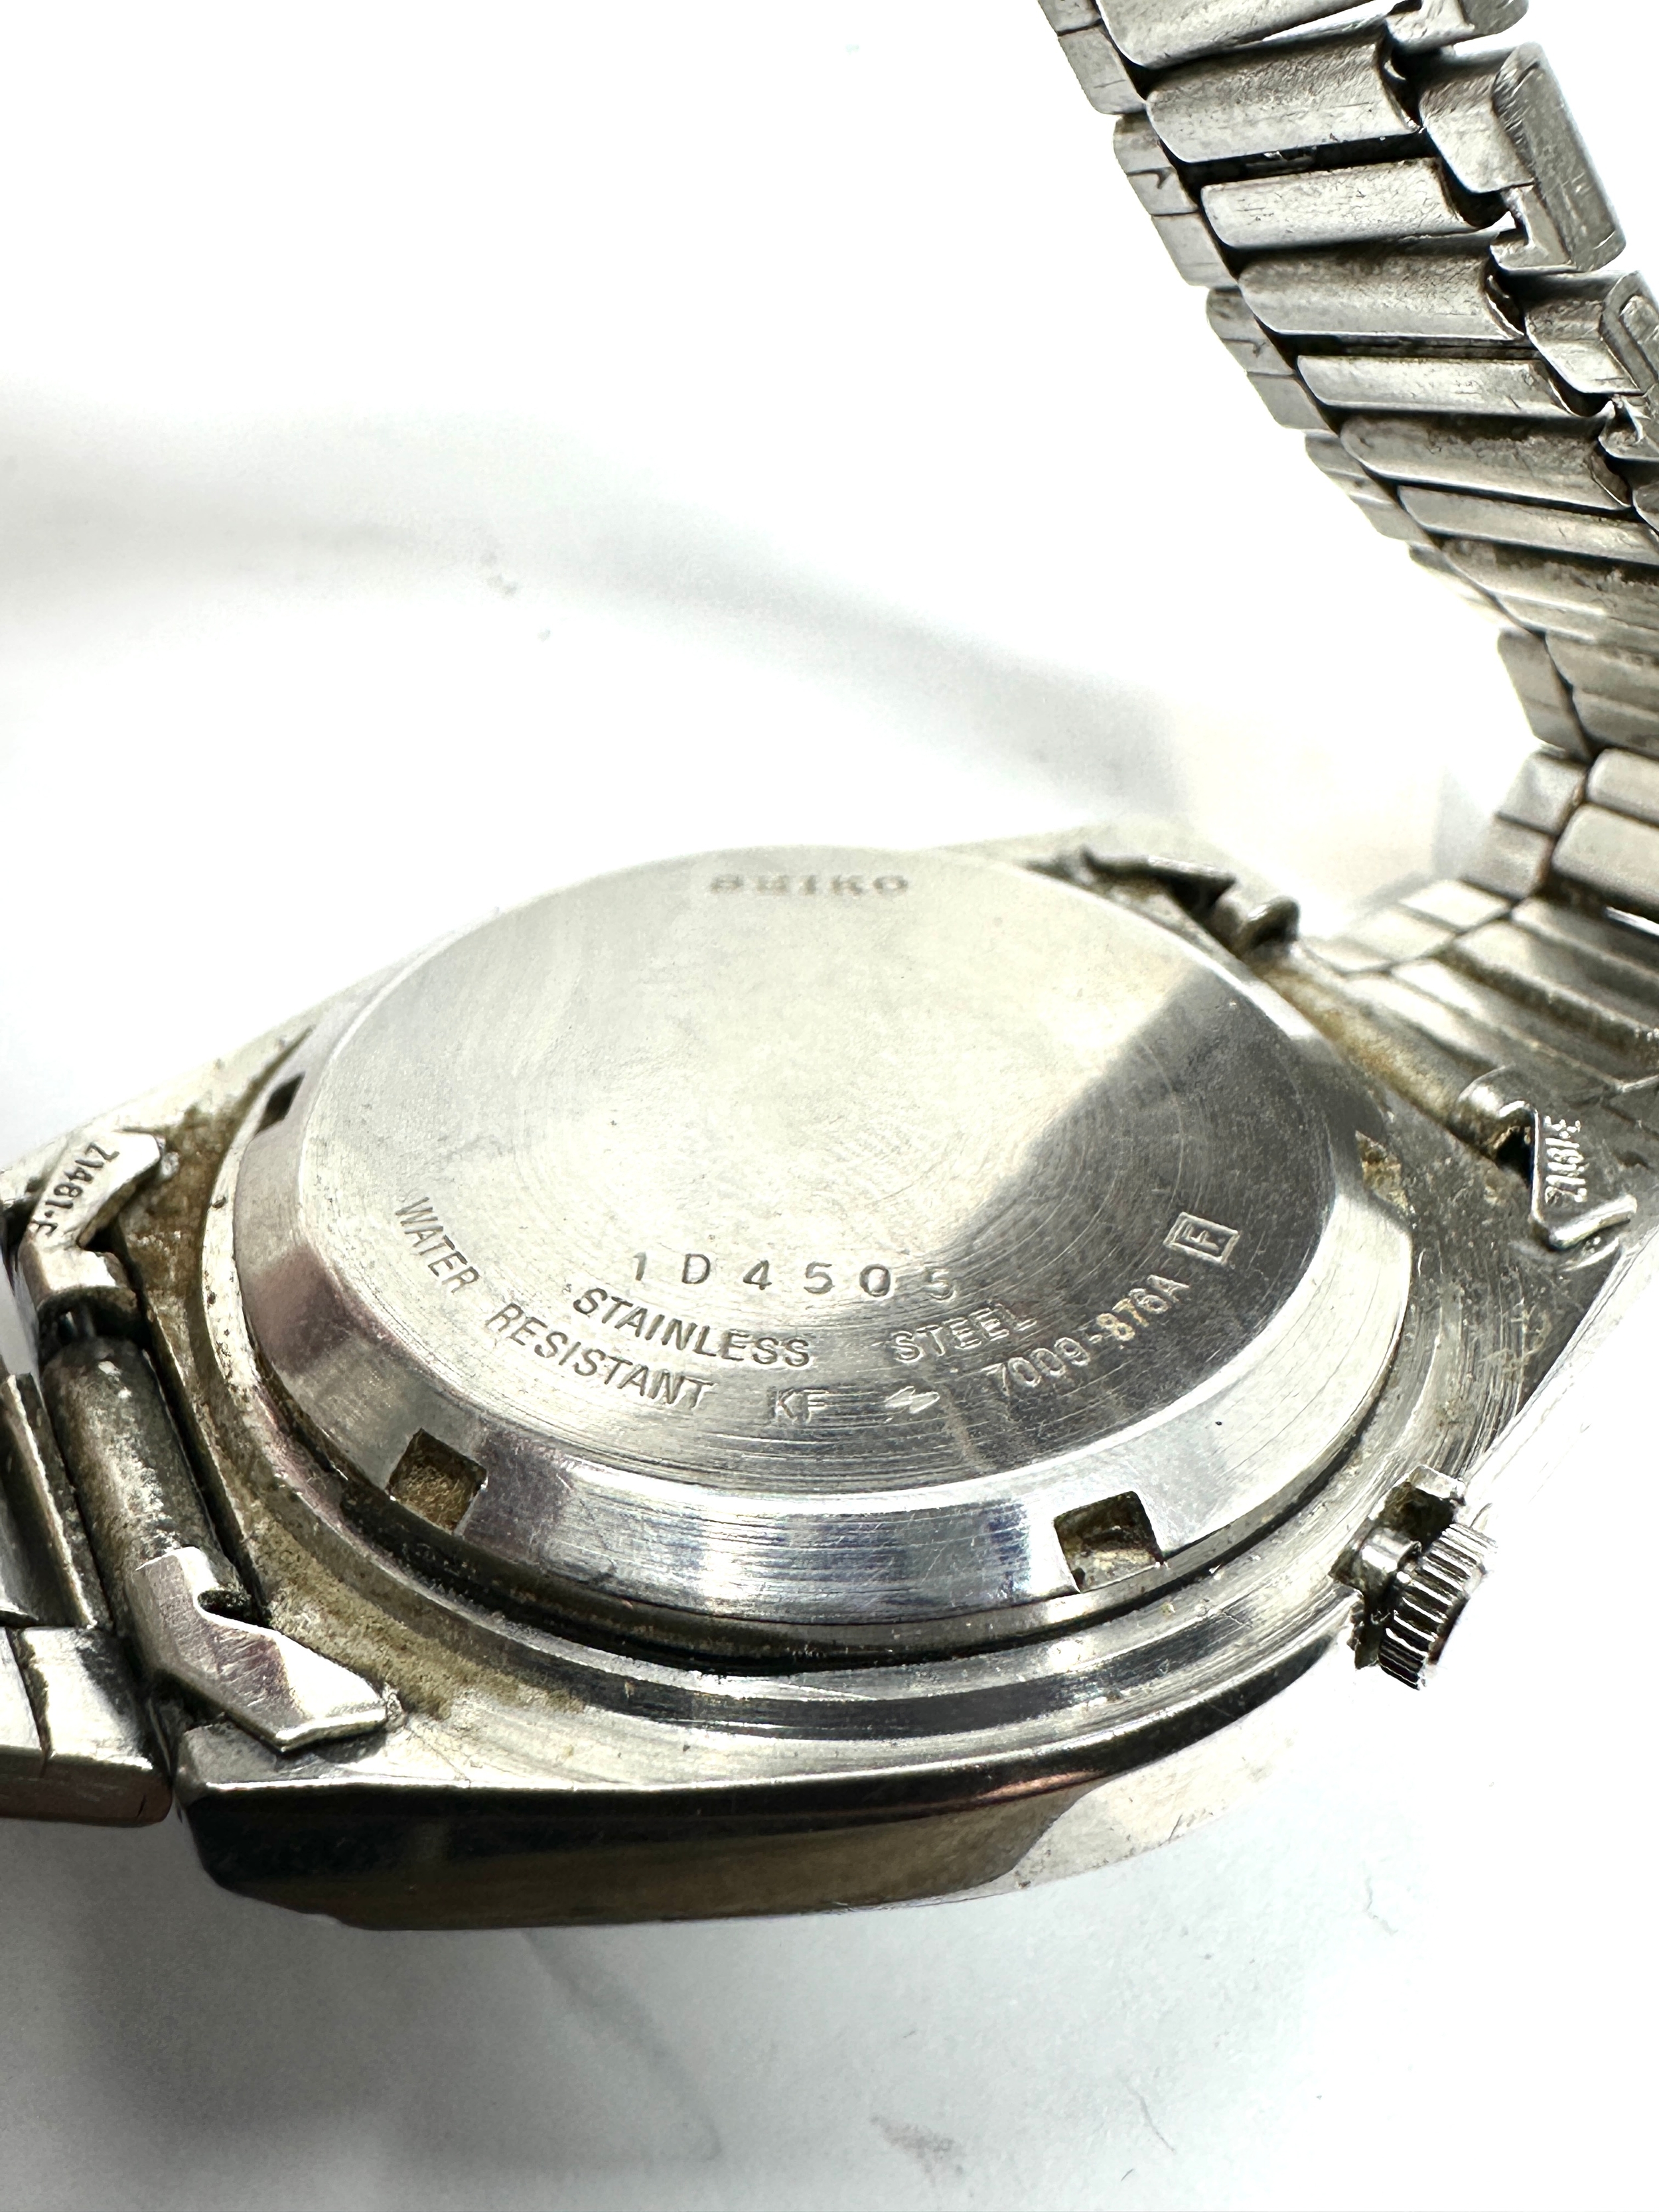 Vintage seiko 5 automatic day date gents wristwatch 7009-876a the watch is ticking - Image 4 of 4